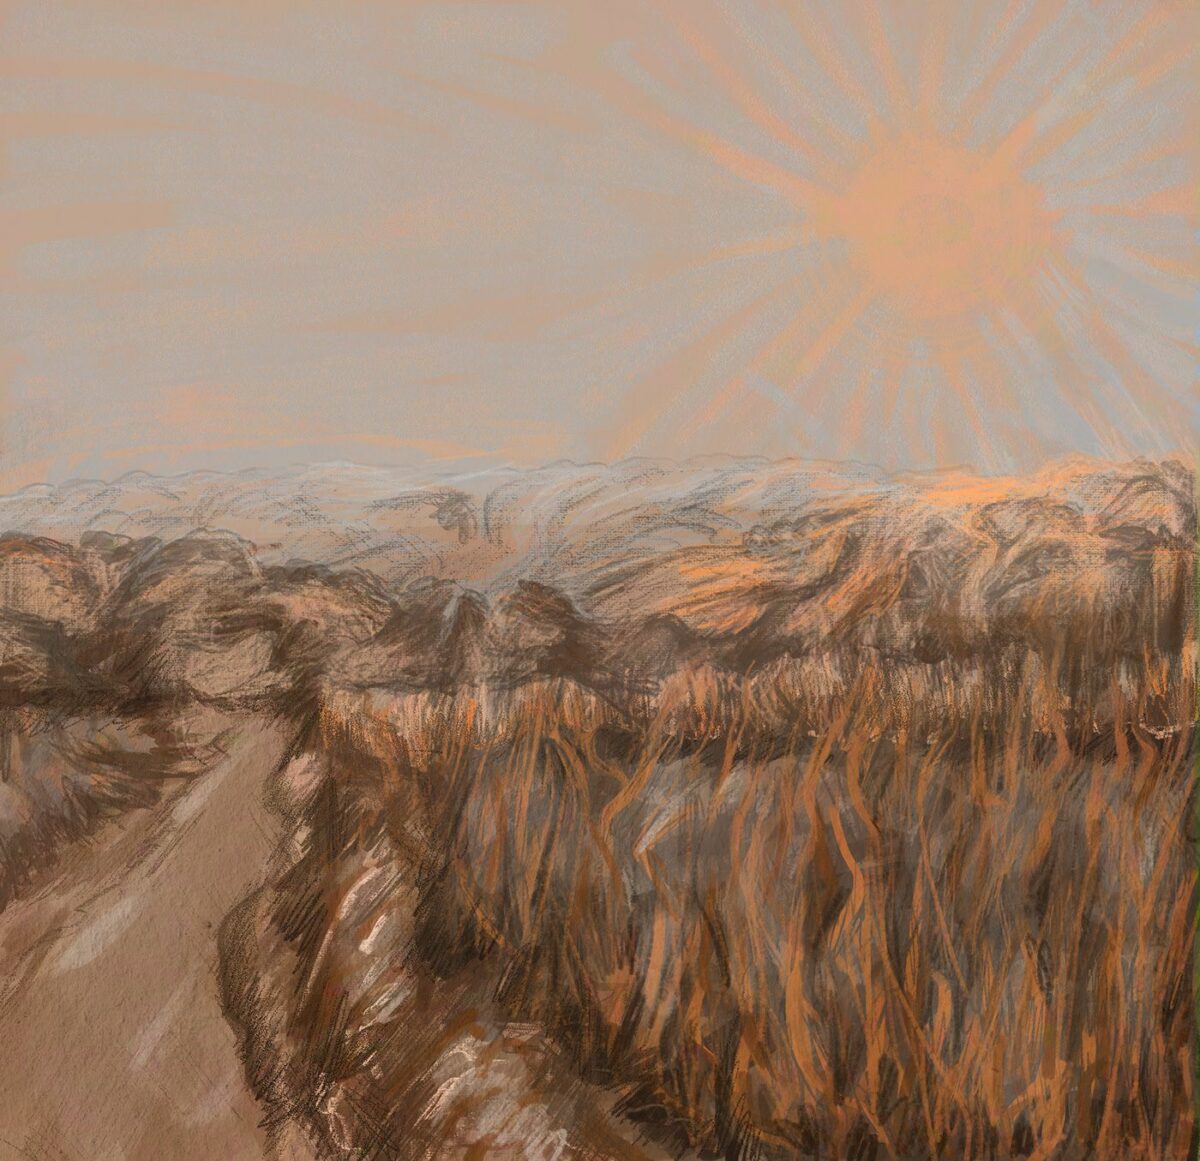 A Walk Through The Fields A Marvelous Digital Painting Series By Veronika Stehr 9